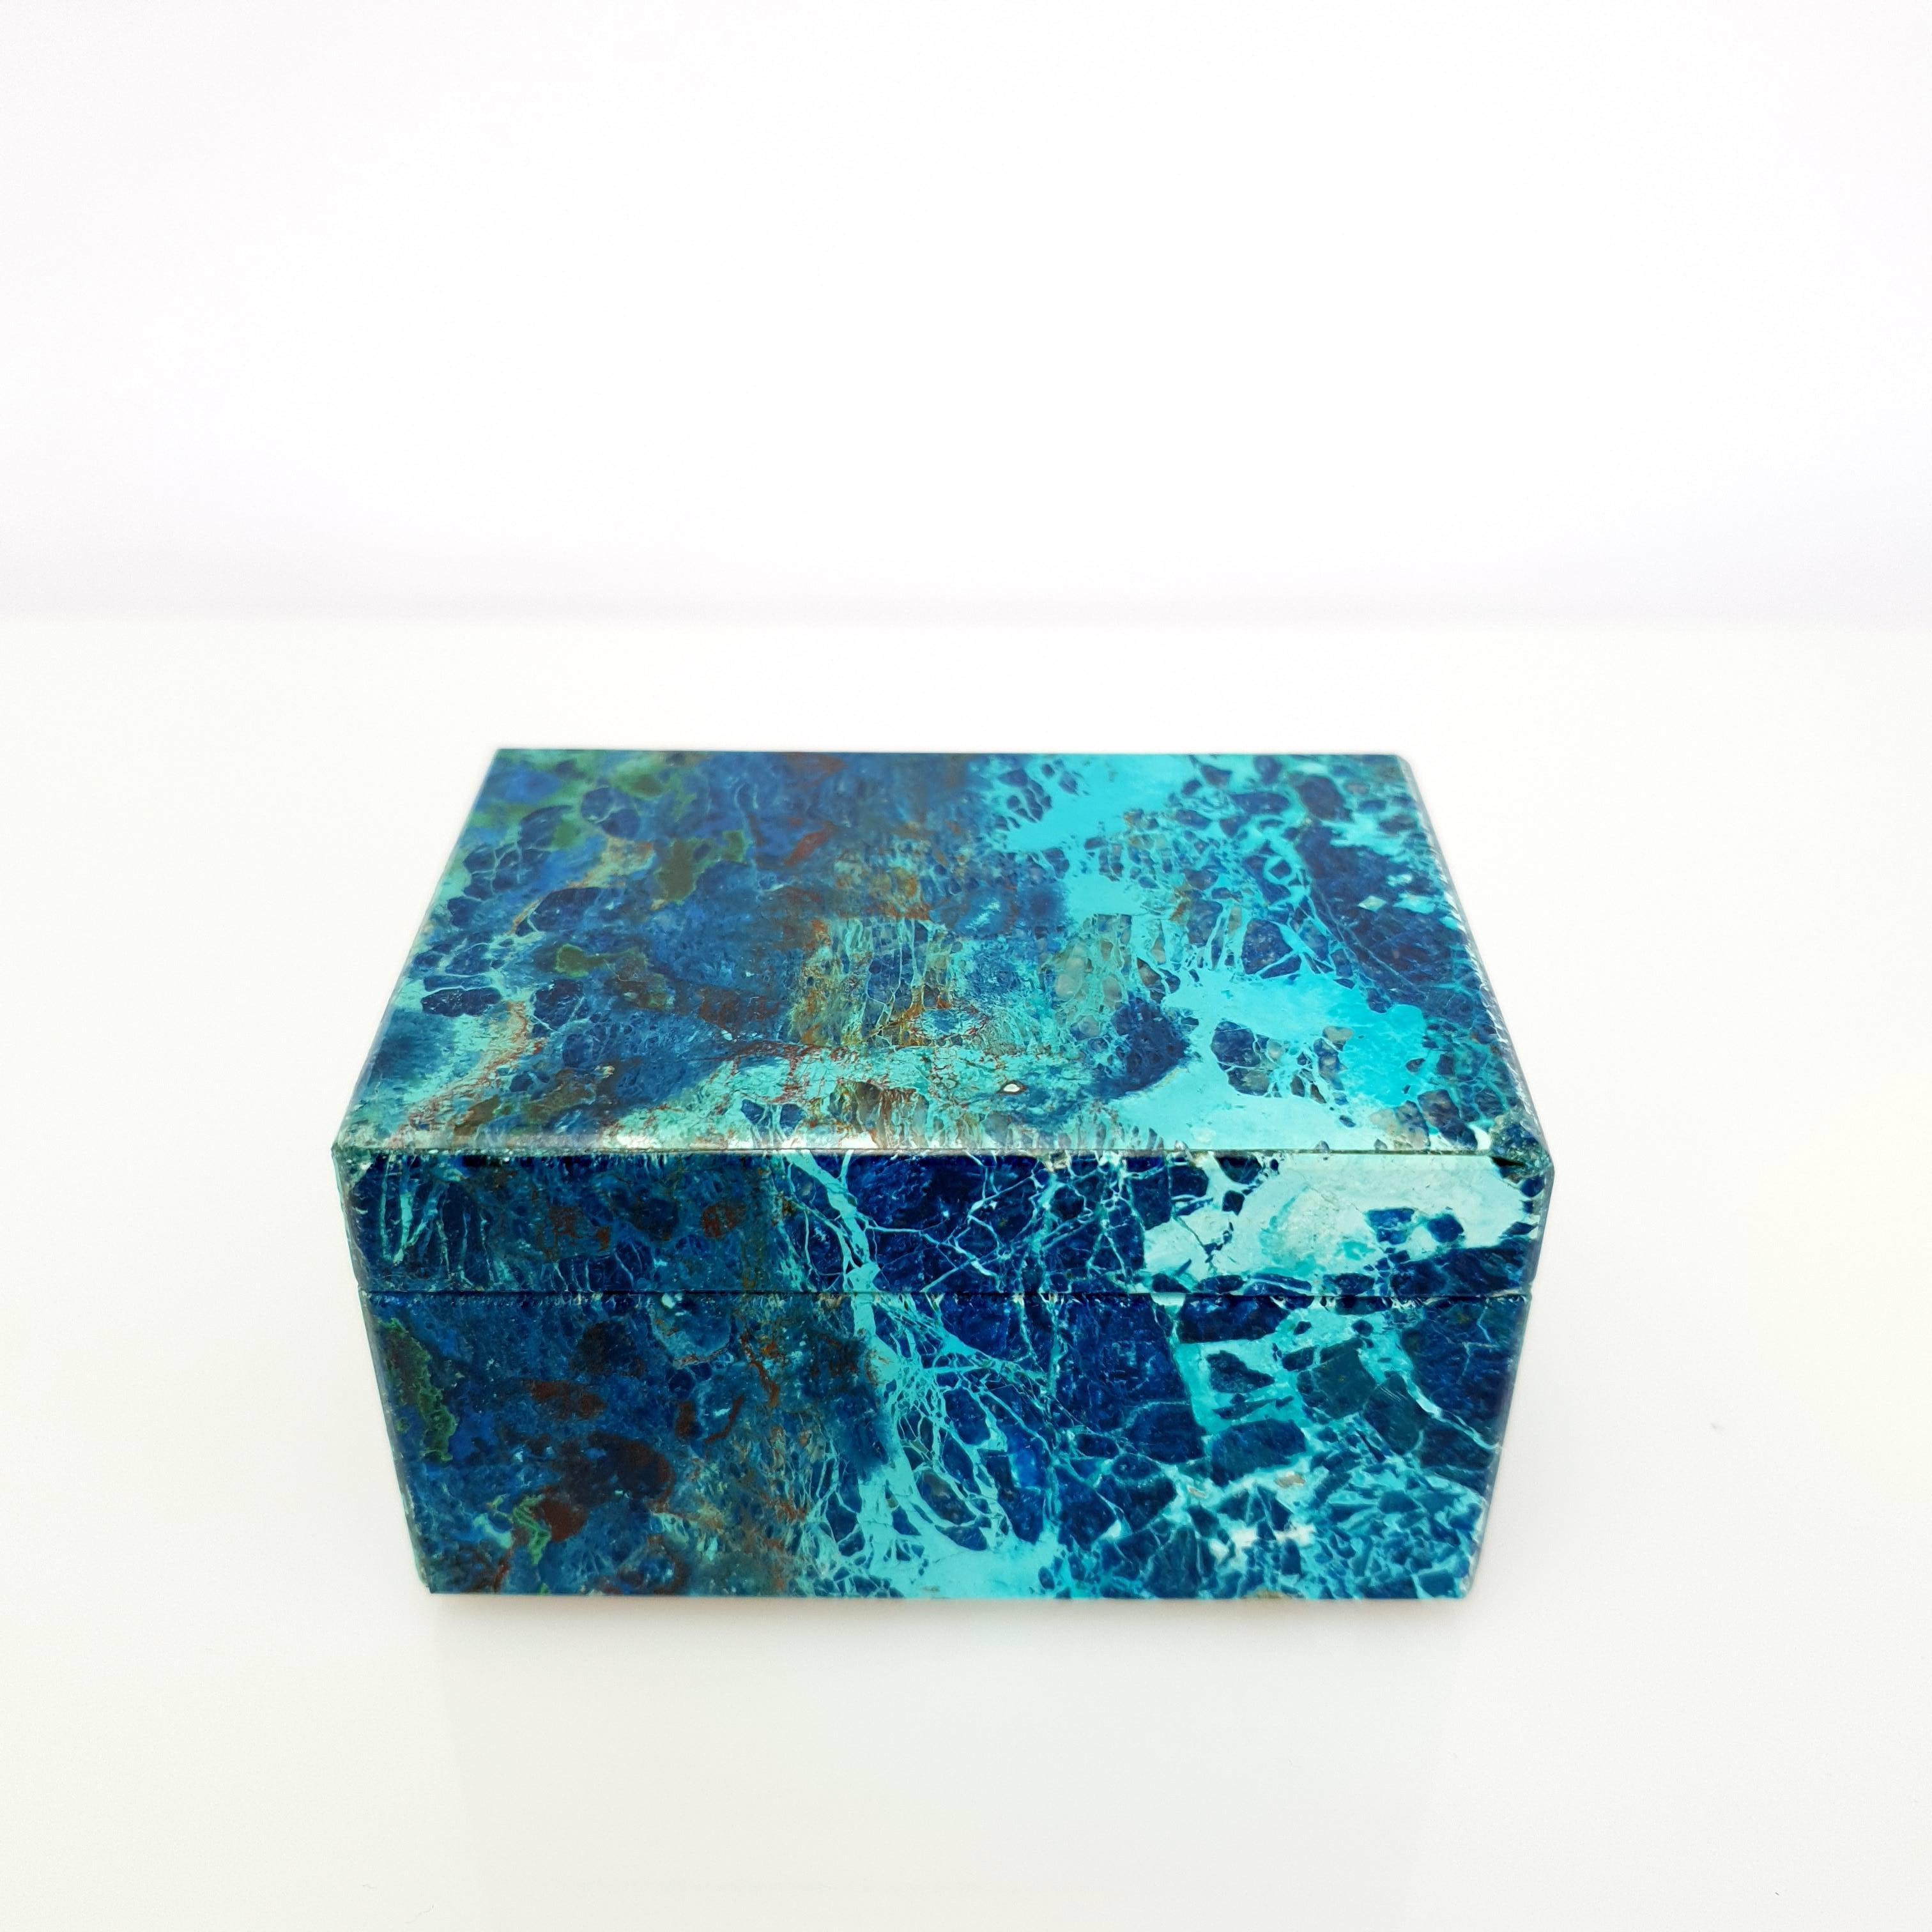 A Natural Handmade turquoise coloured Shattuckite Decorative Jewelry Box.
The pattern looks like an artful painting of nature. 
Shattuckite is a mixed mineral of Chrysokoll, Malachite and Dioptas and comes from Kongo.
It should be emphasized that